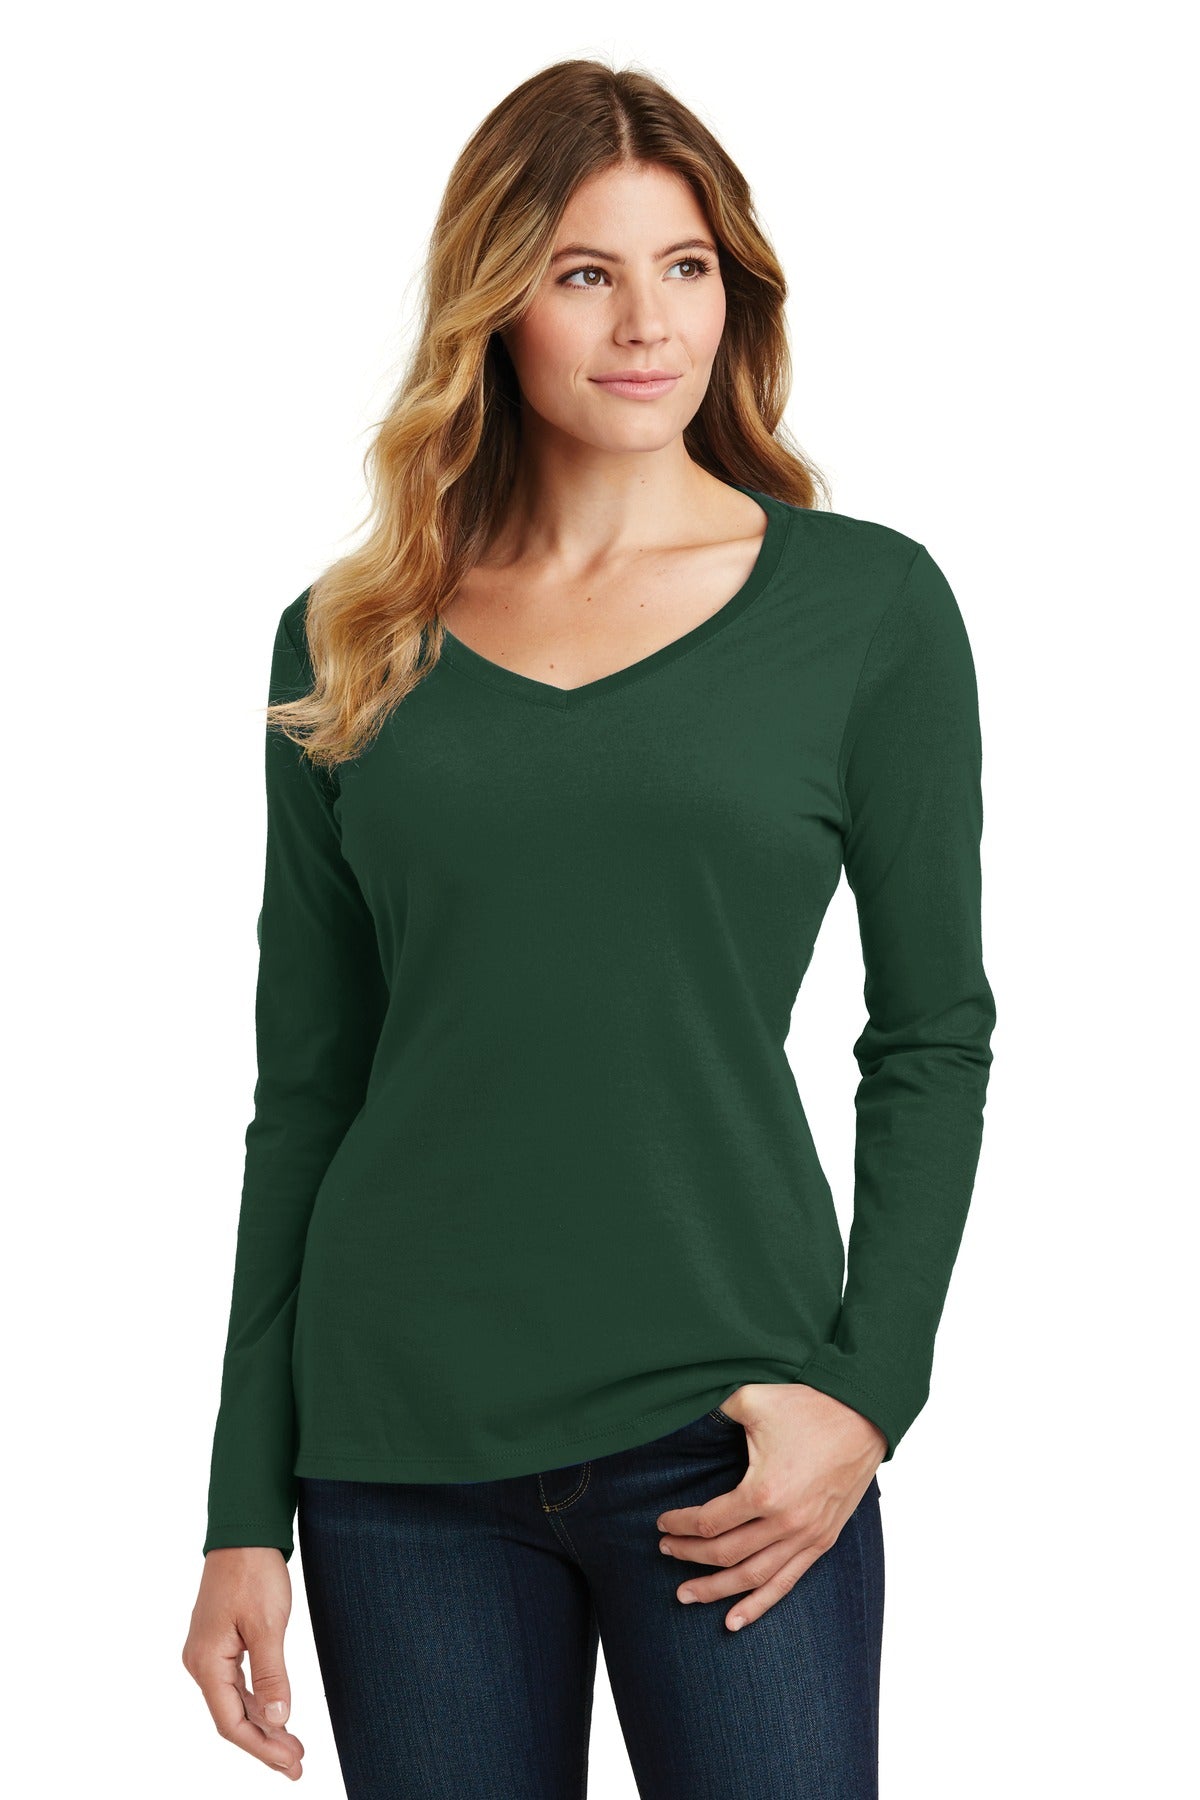 Photo of Port & Company Ladies LPC450VLS  color  Forest Green